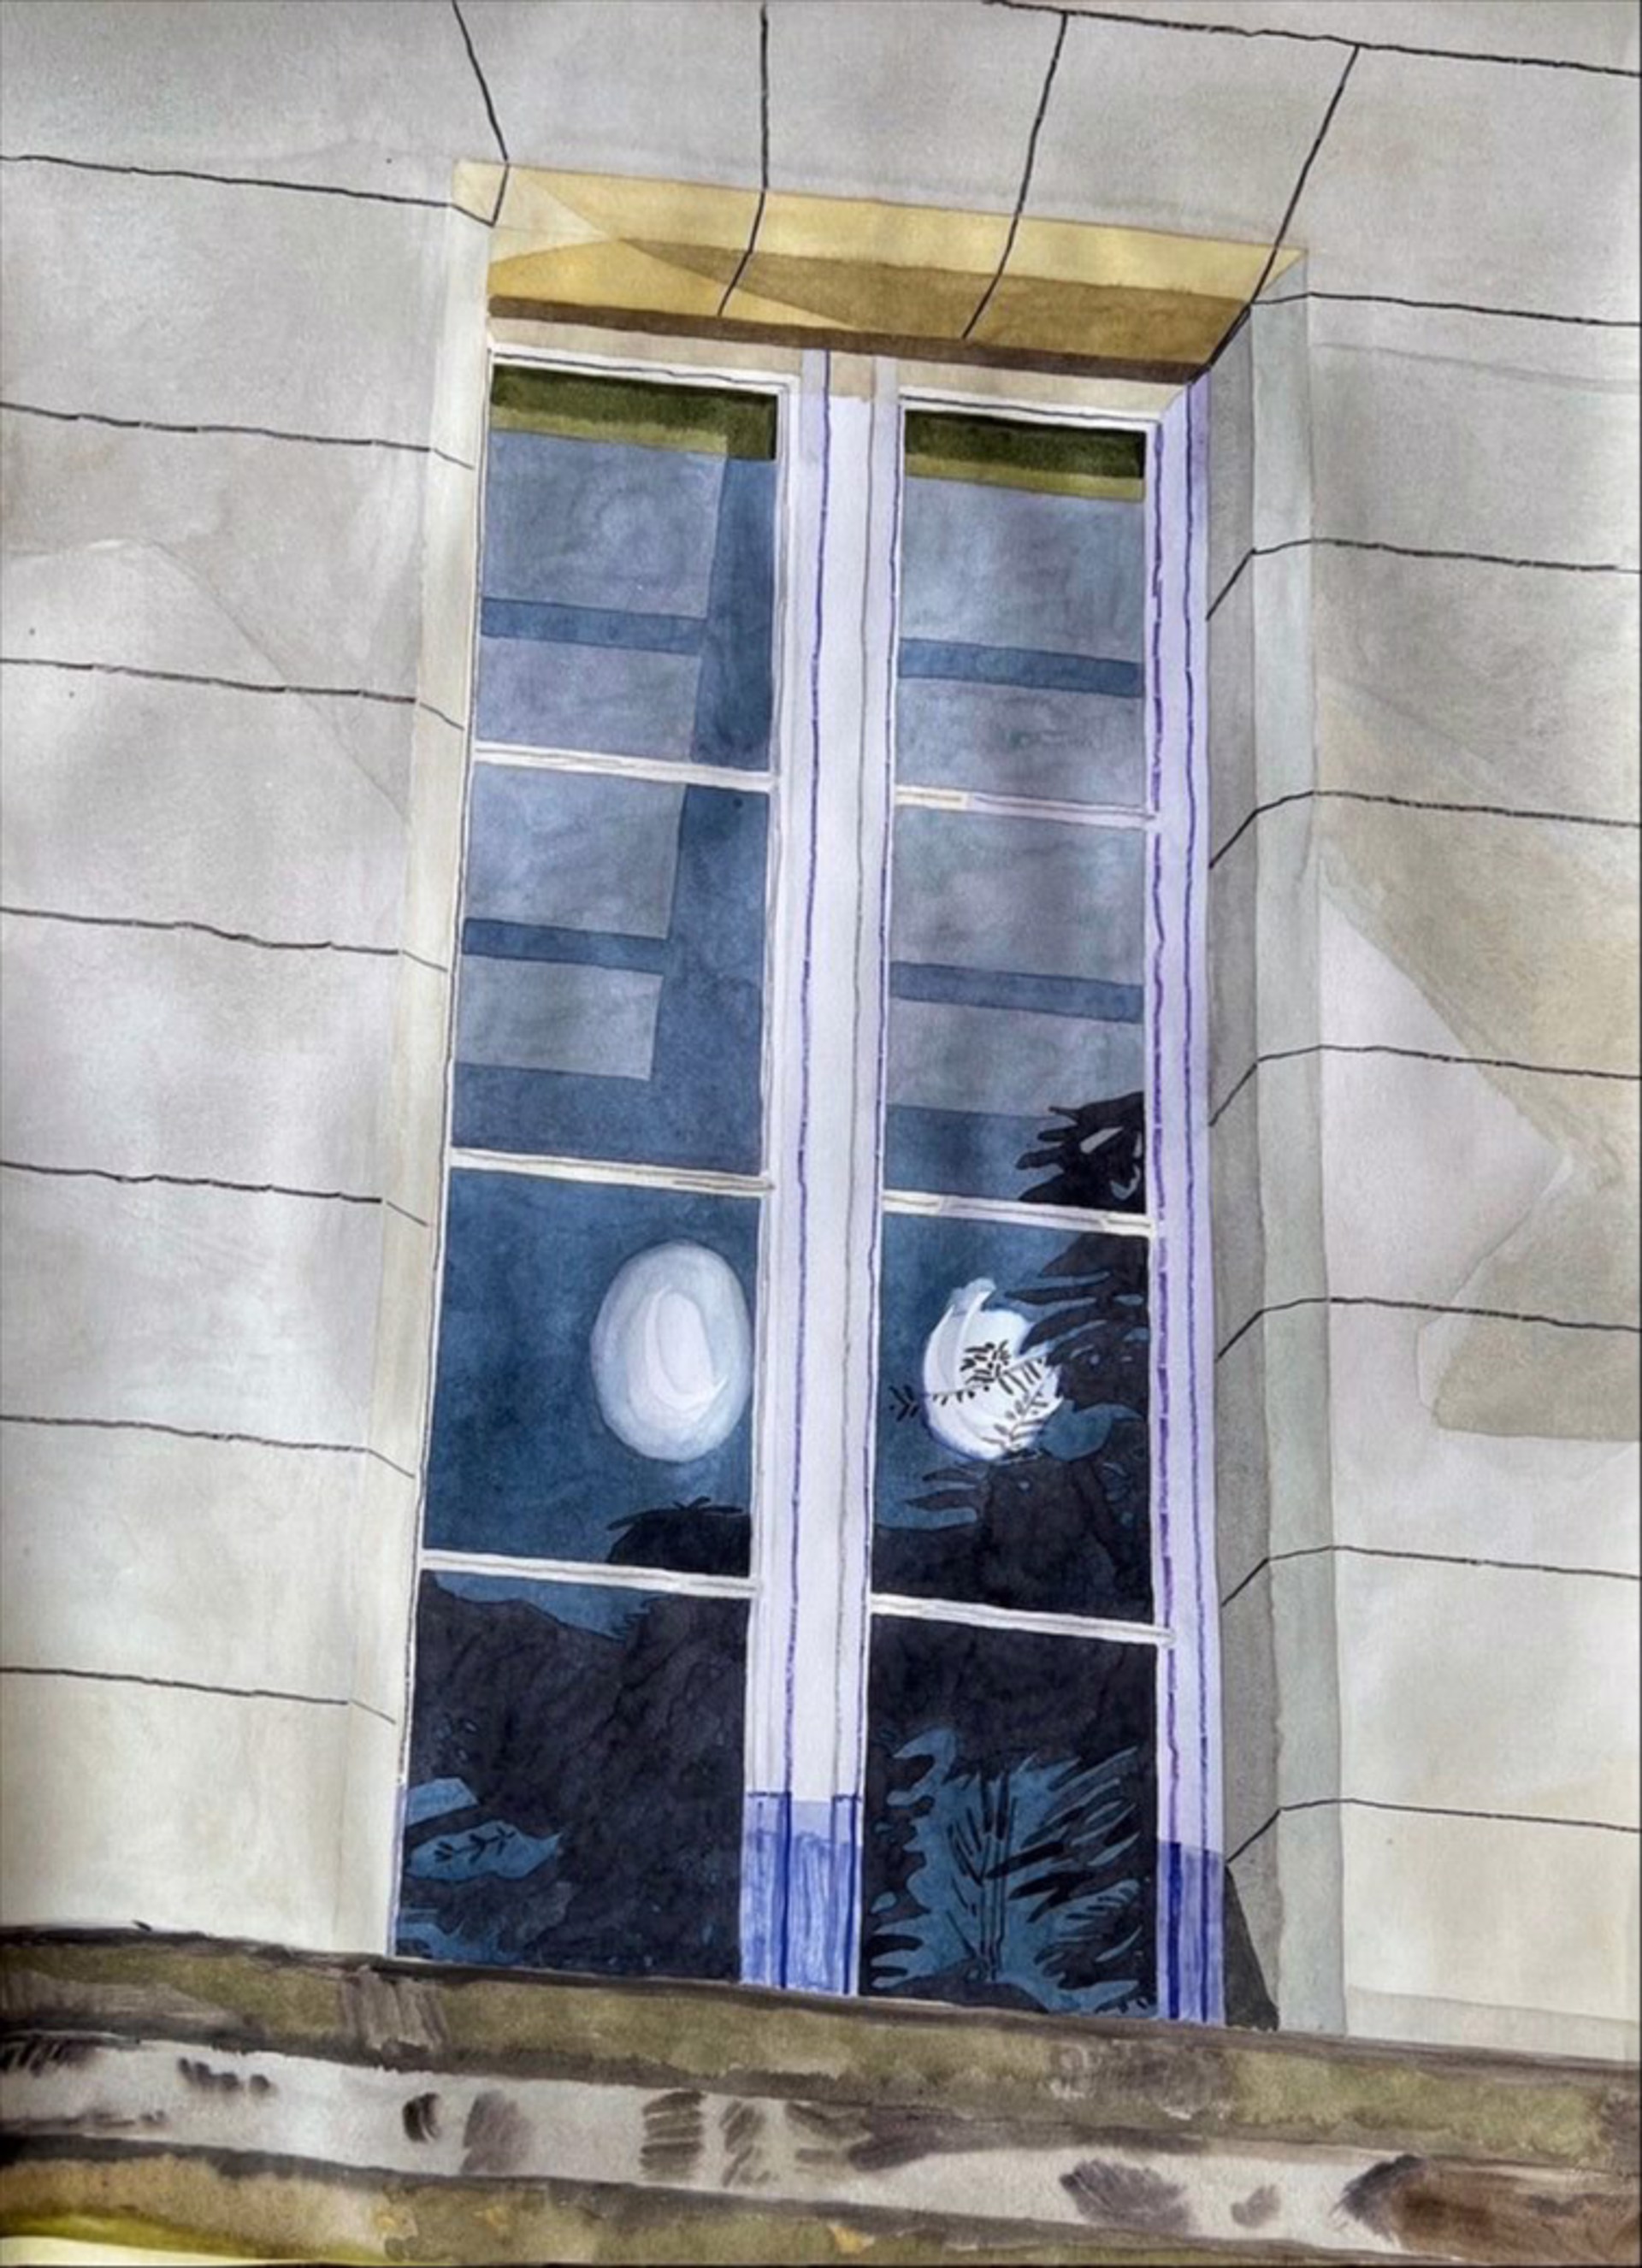 French Window (2 Moons) by Bradley Kerl